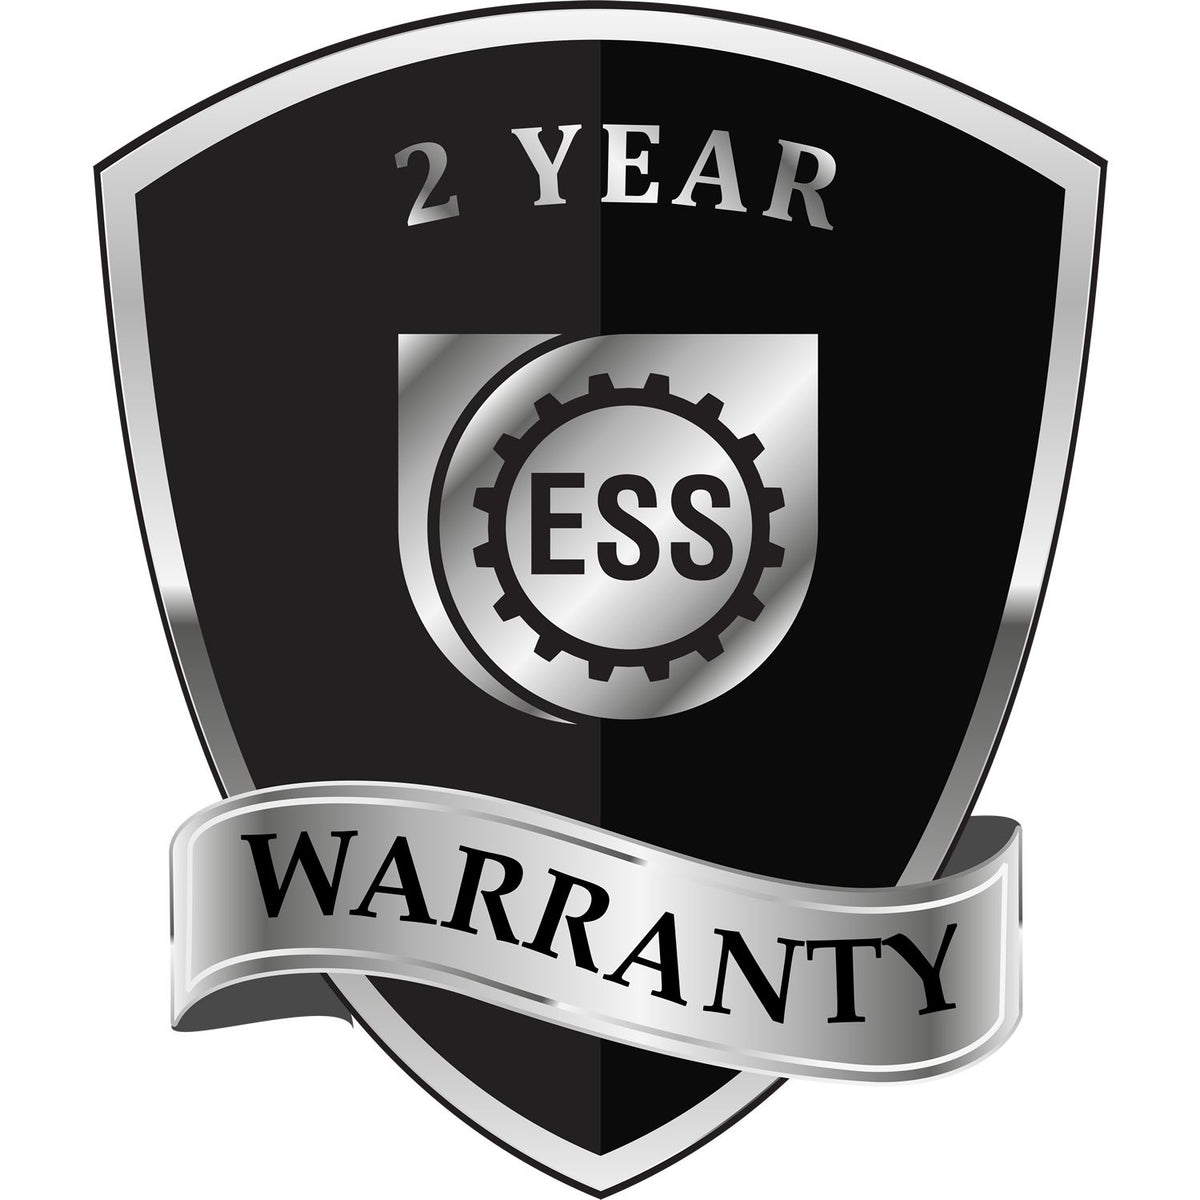 A badge or emblem showing a warranty icon for the Extended Long Reach Guam Surveyor Embosser